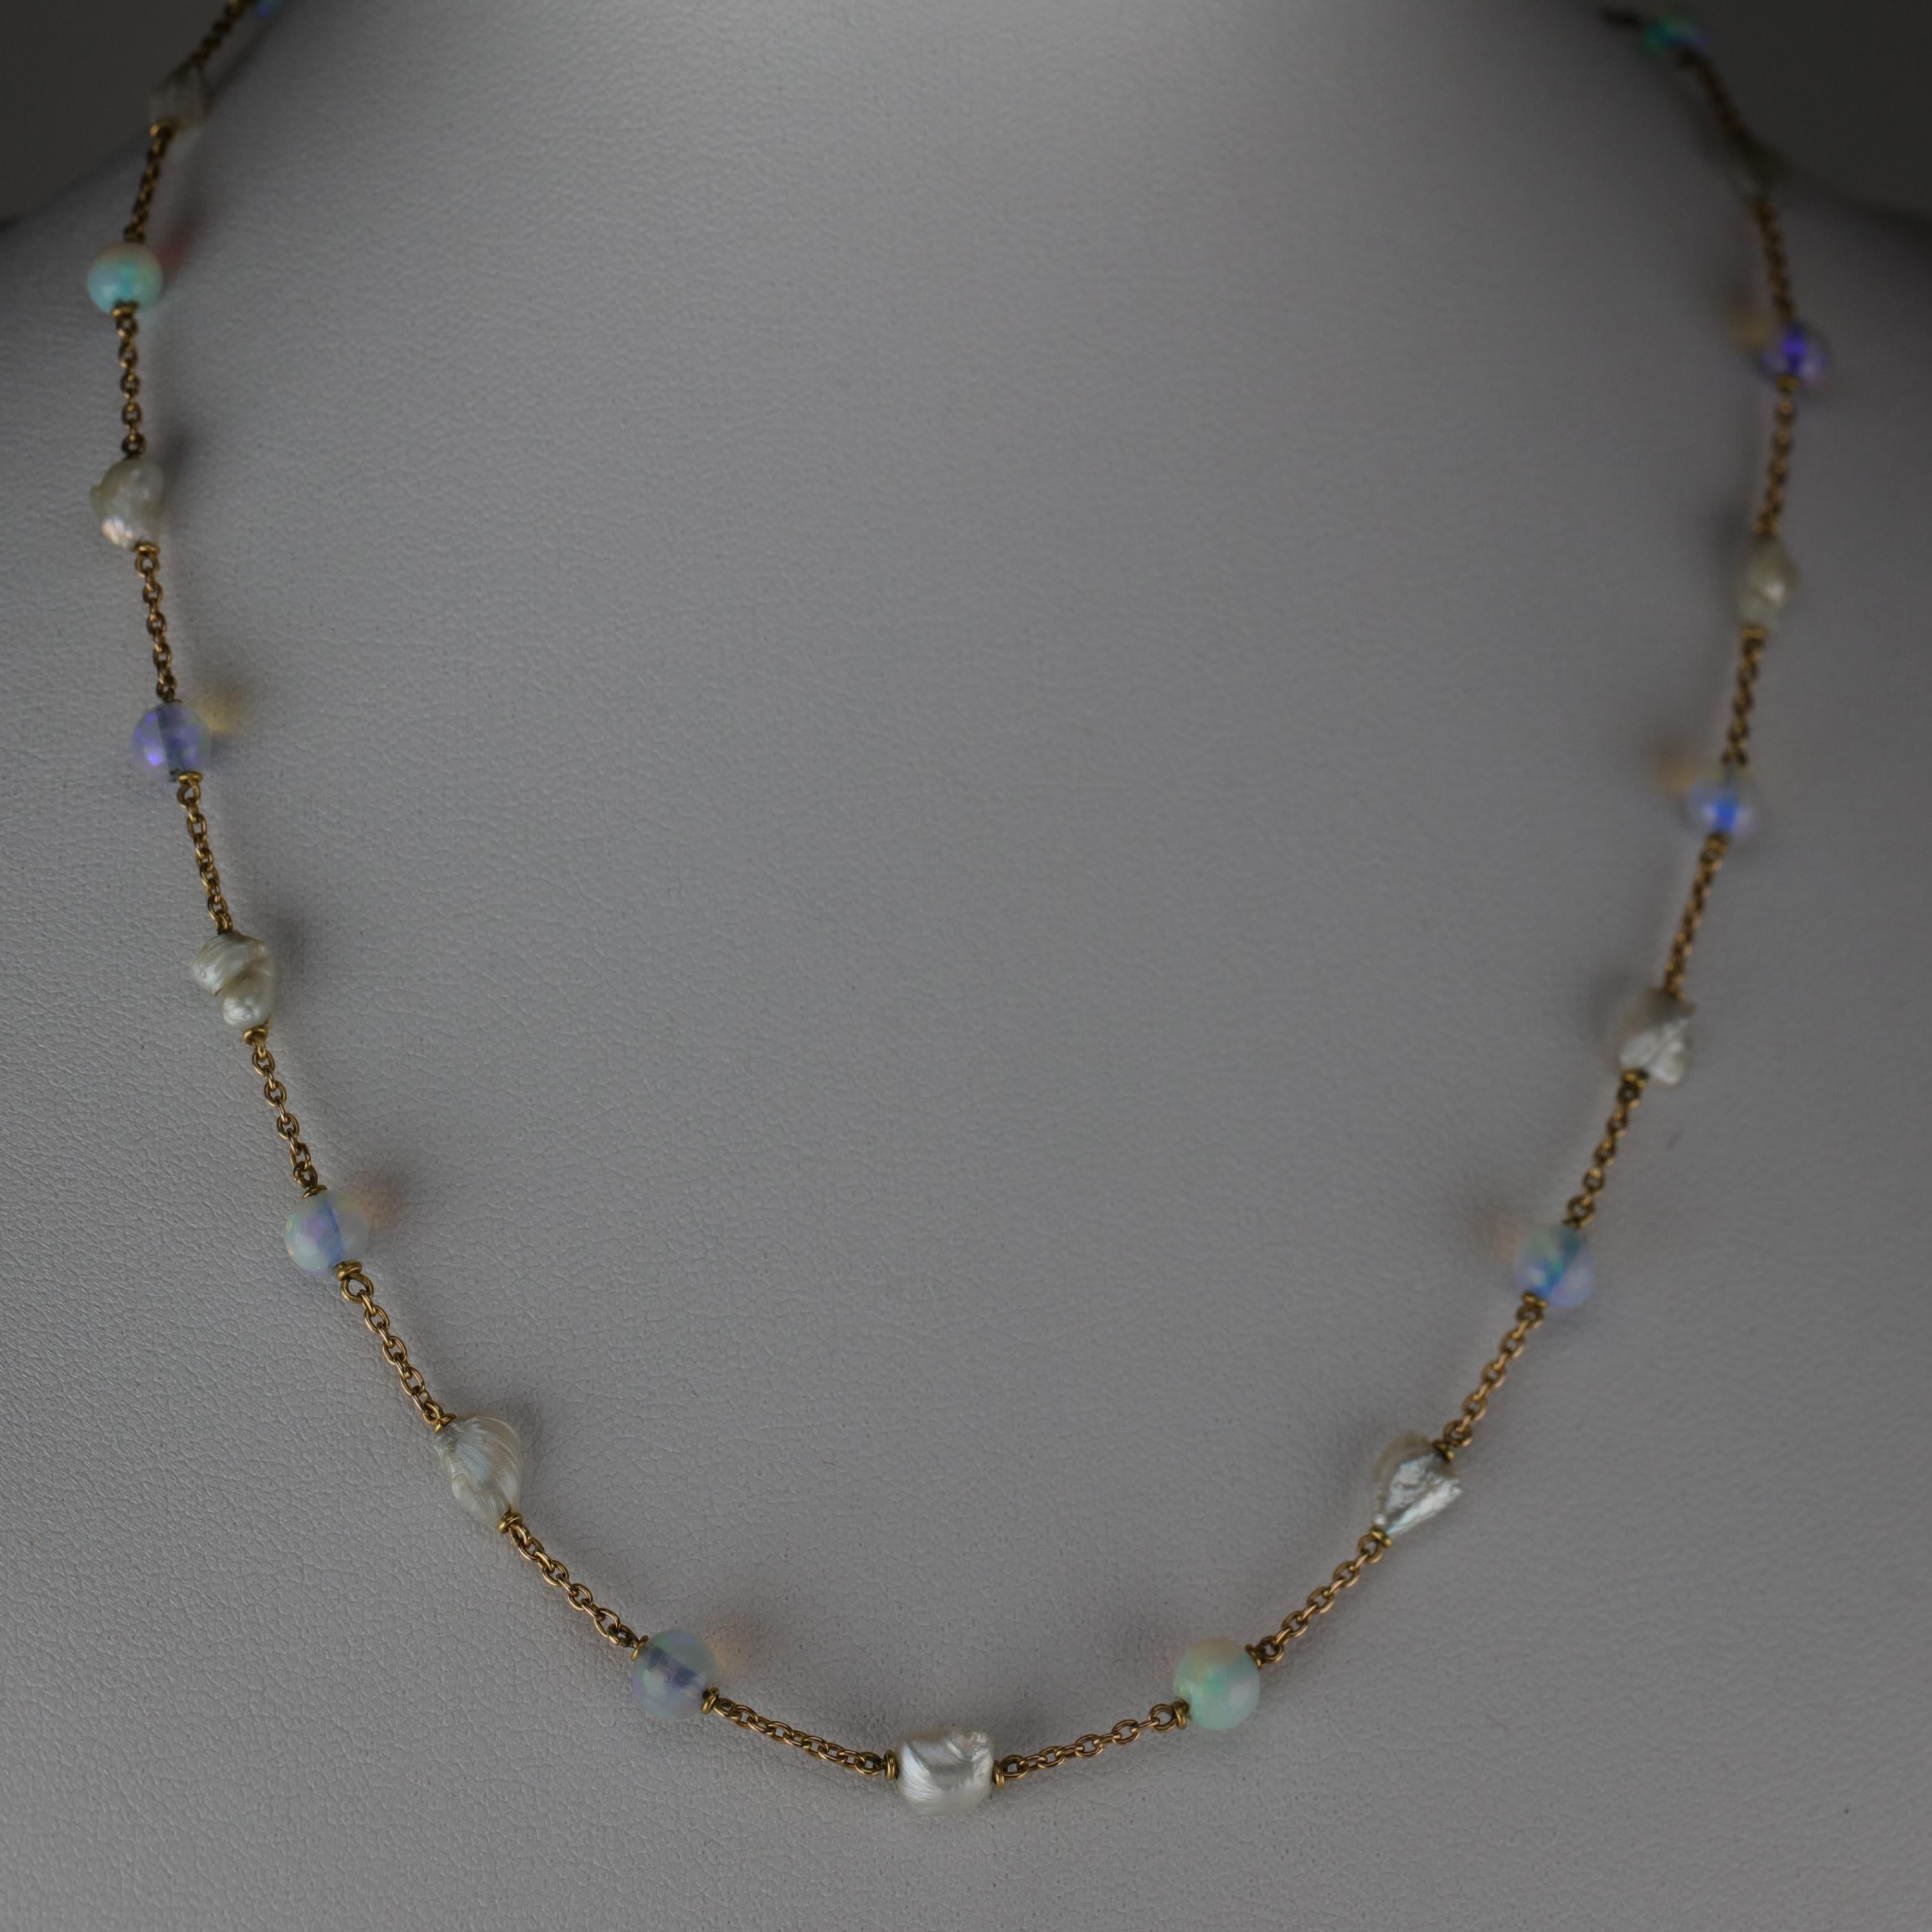 This Edwardian-era necklace of 18K yellow gold features alternating stations of opal beads and natural freshwater pearls. The natural pearls are freshwater river pearls and have retained their beautiful luster and colorful orient despite being over